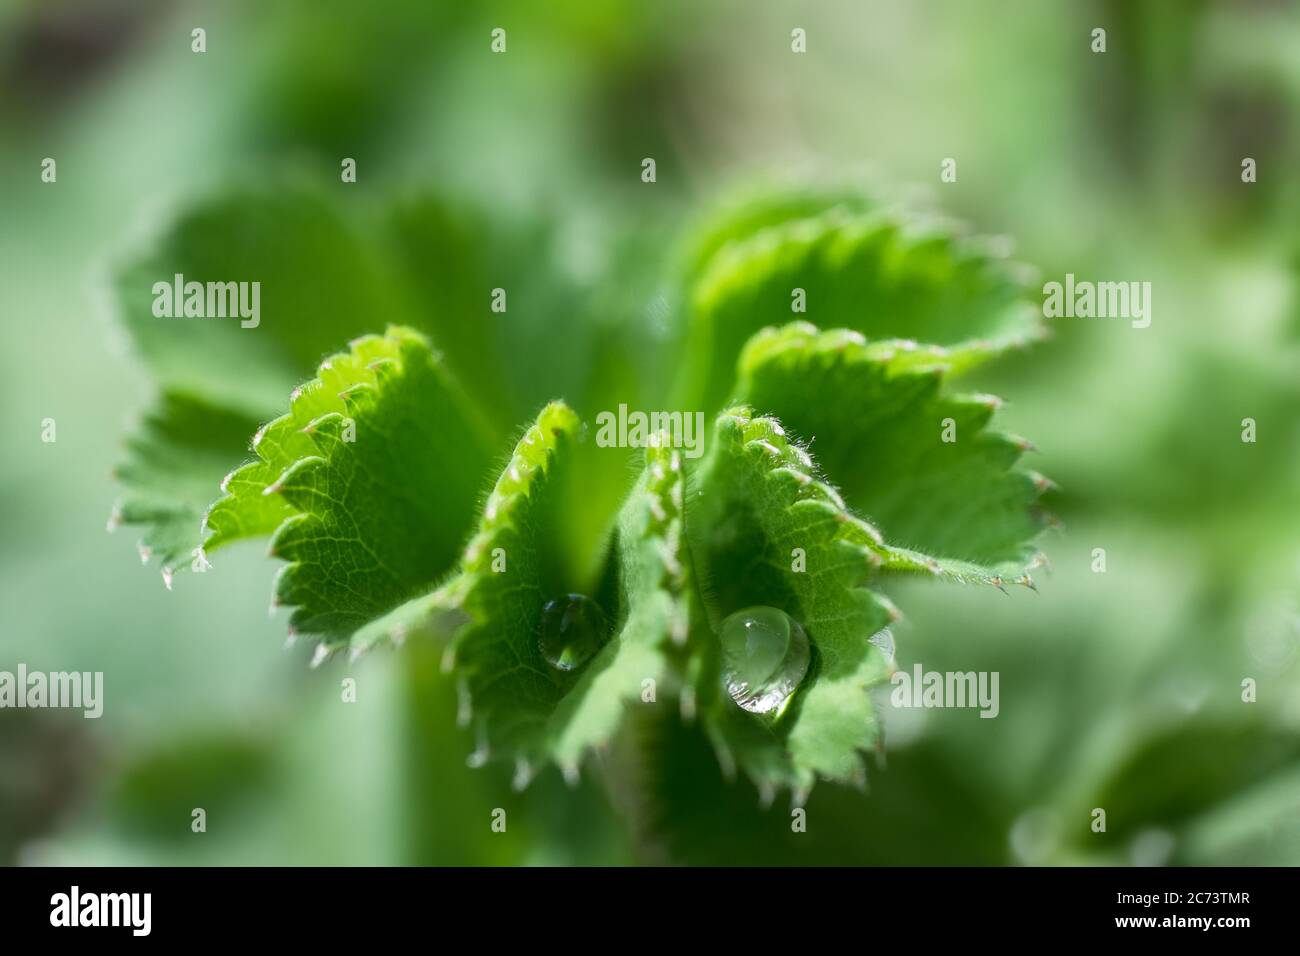 Water drops on the unfolding leaves of  a Lady's Mantle or Alchemilla mollis. Narrow depth of field Stock Photo